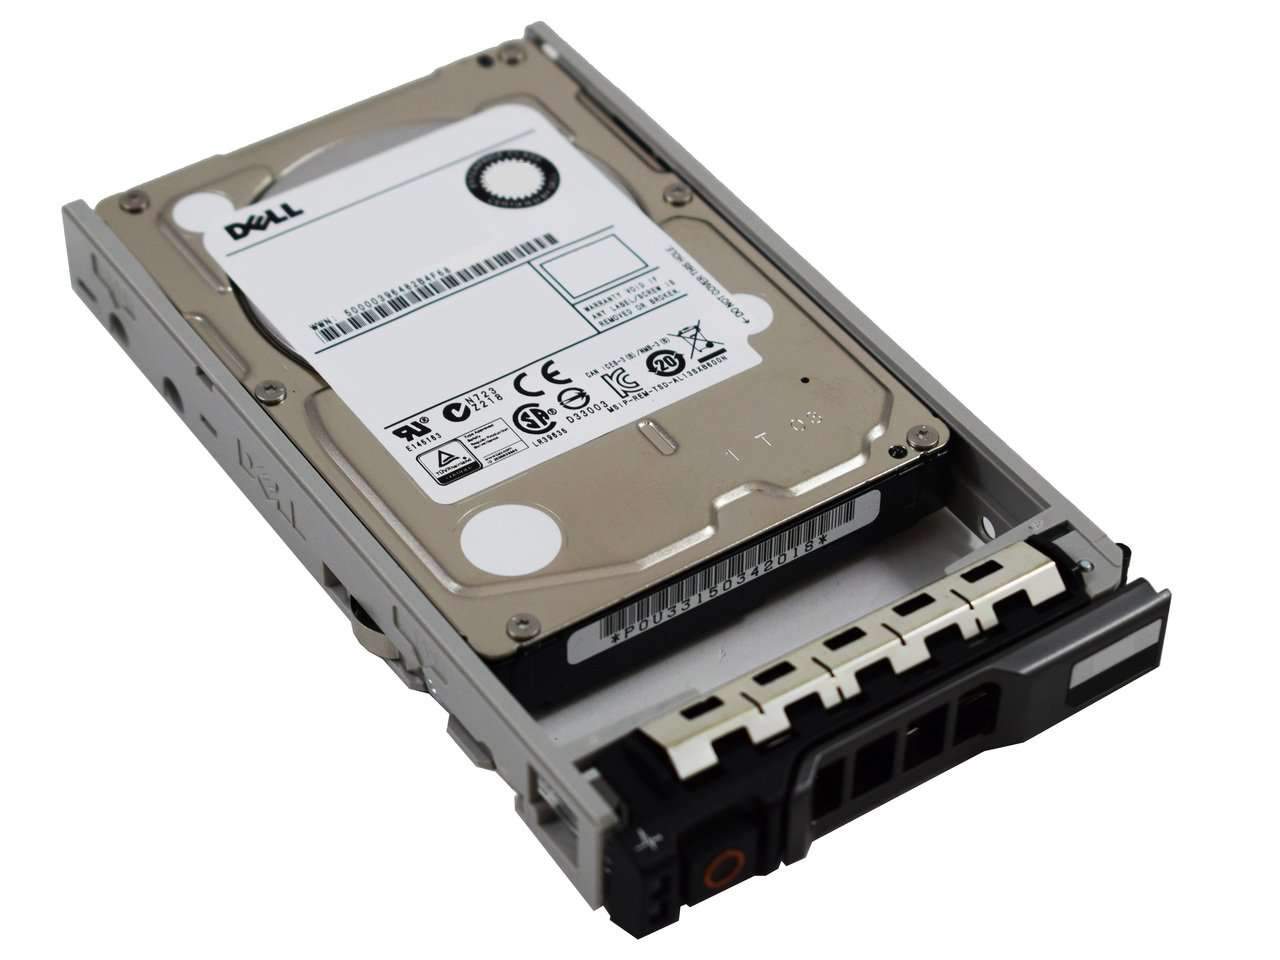 Dell G13 0D5FMJ 2TB 7.2K RPM SAS 12Gb/s 512n 2.5" NearLine Manufacturer Recertified HDD